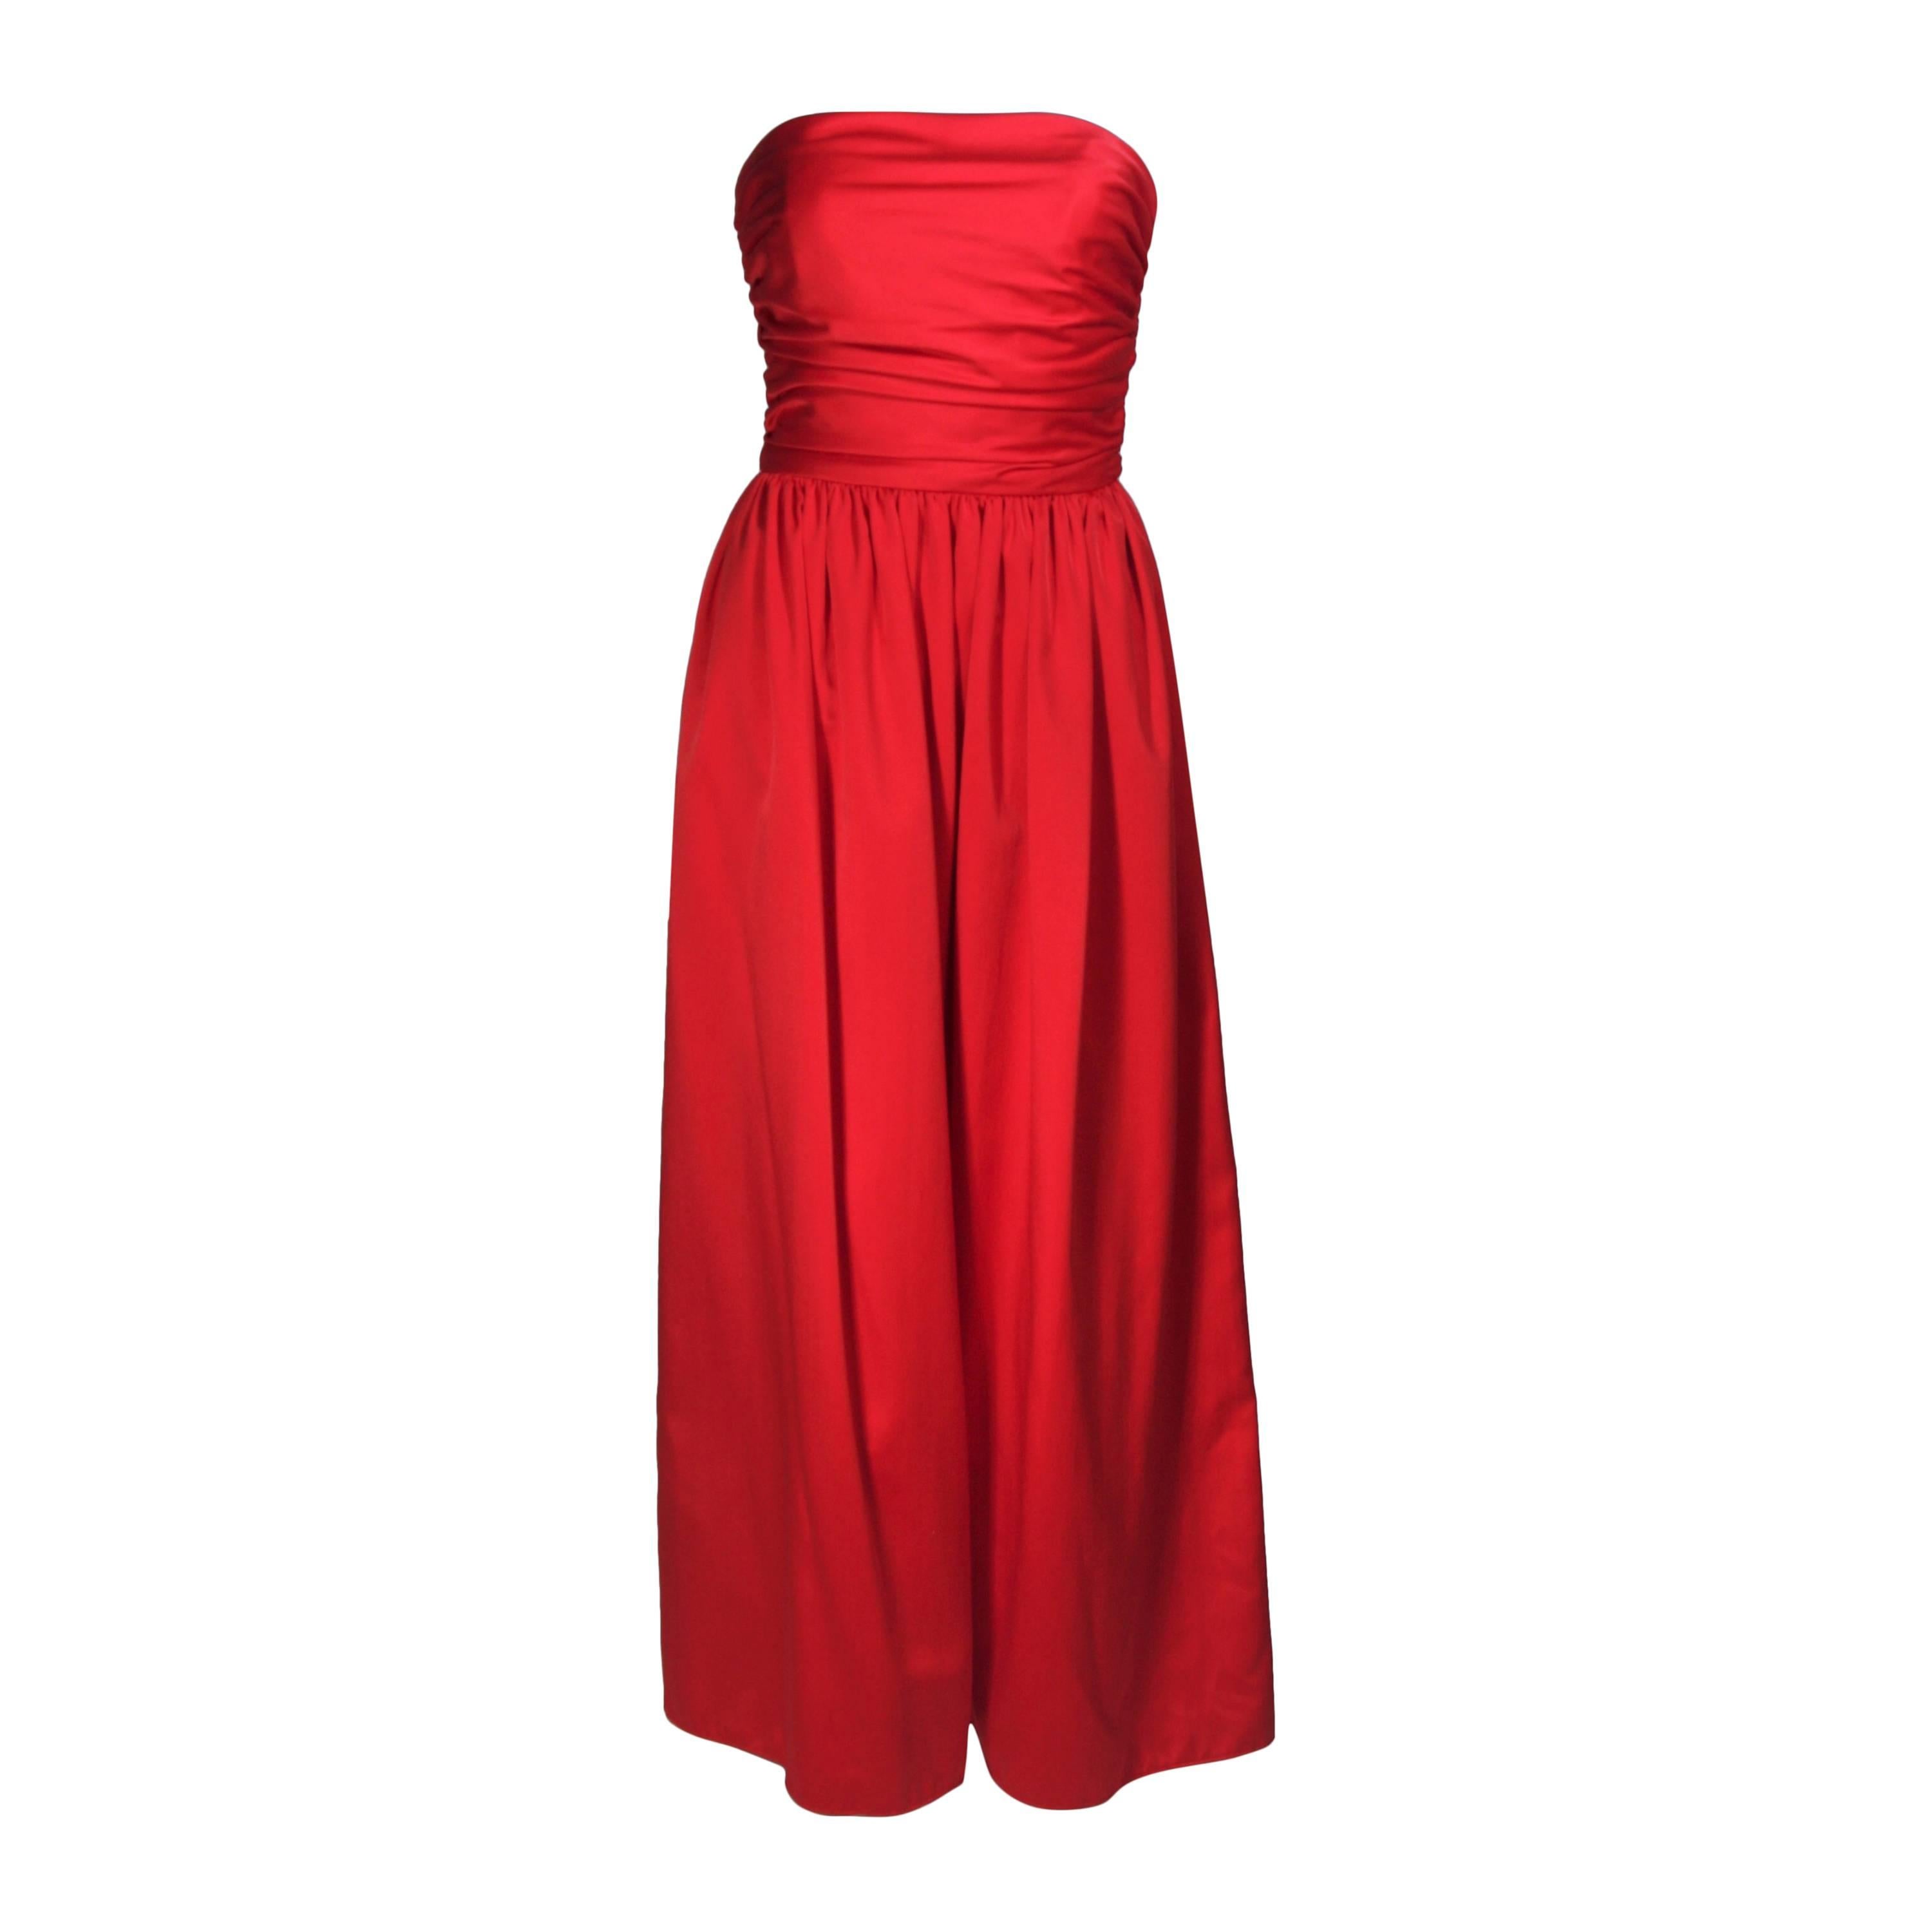 ANTHONY MUTO Red Gown with Gathered Bodice and Waist Tie Size 4-6